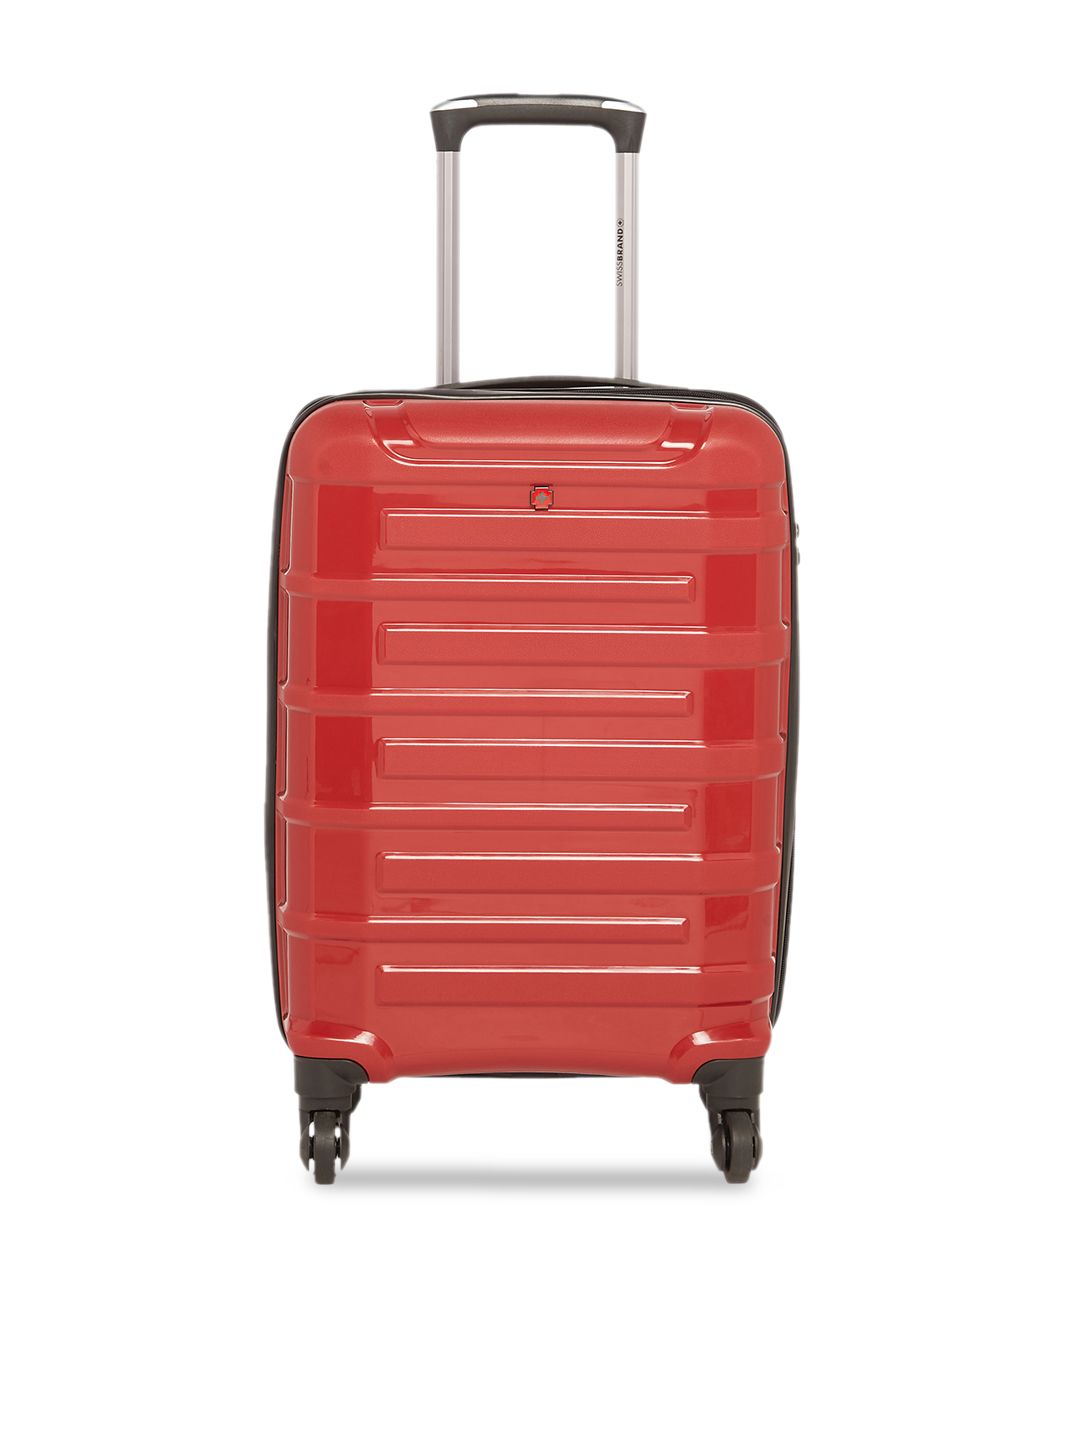 SWISS BRAND Red & Grey Solid SION 360-Degree Rotation Hard-Sided Cabin Trolley Suitcase Price in India